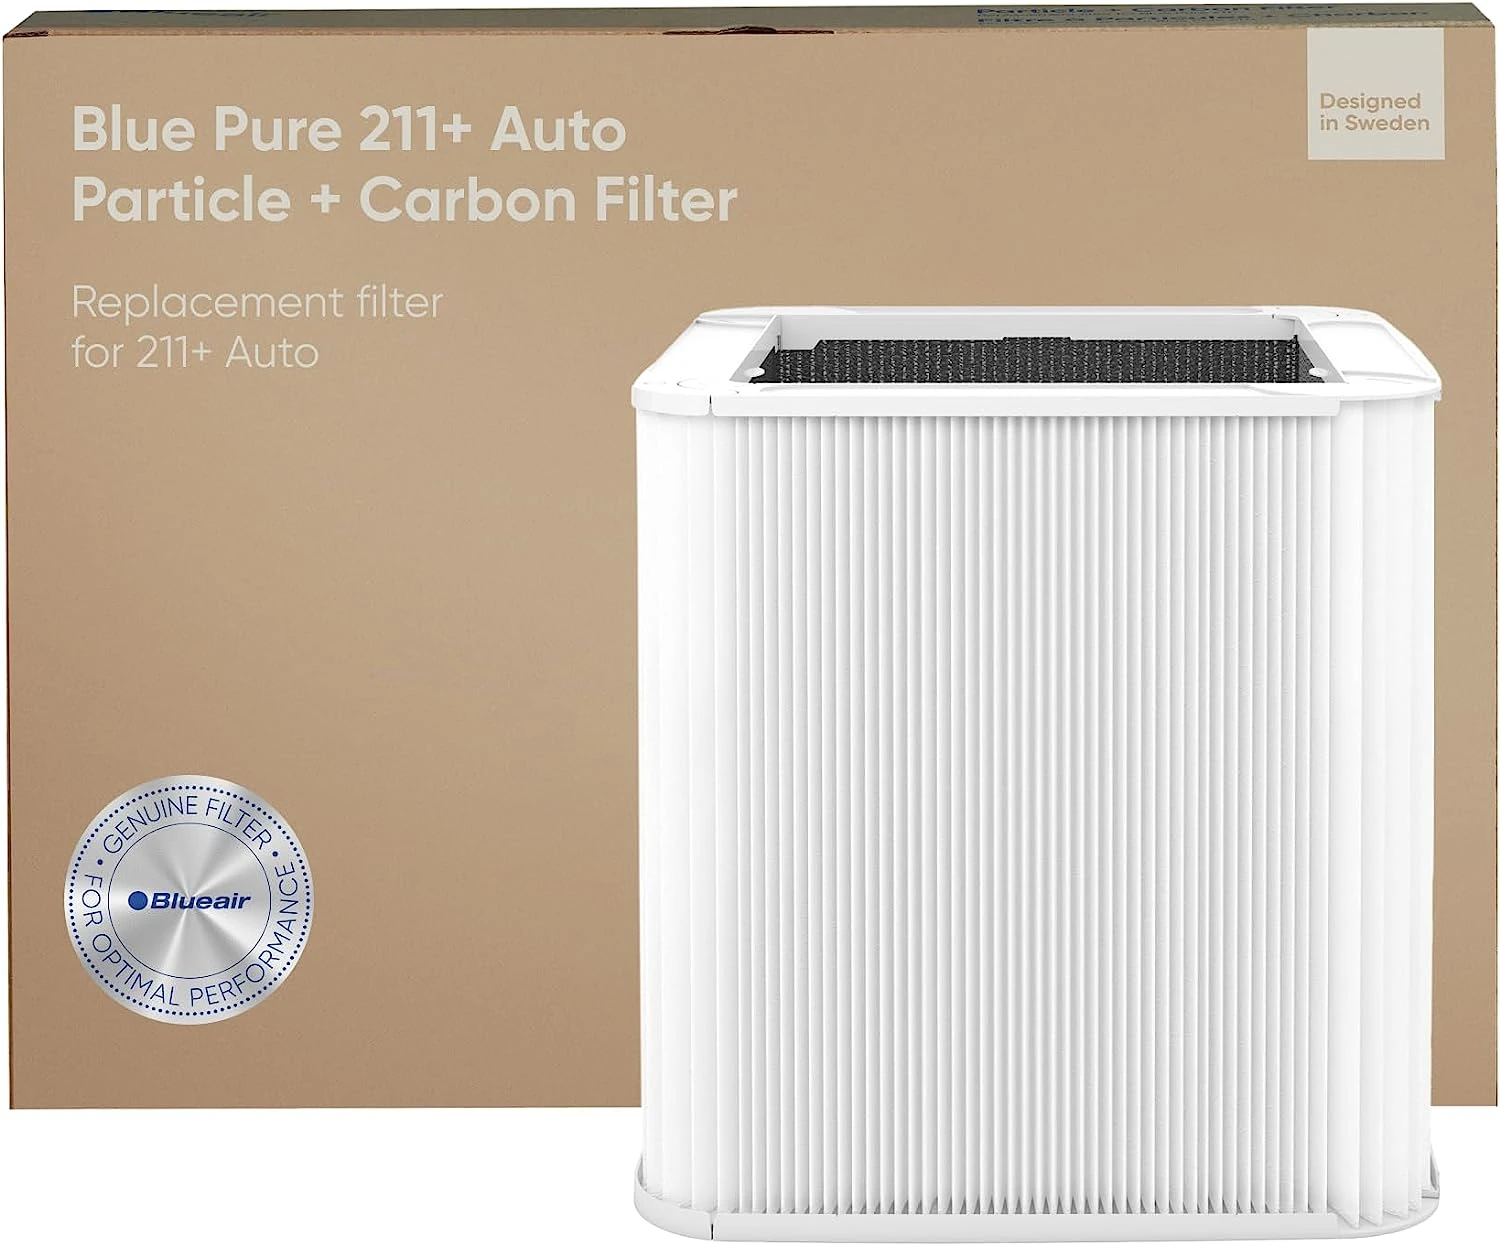 

Pure 211+ Auto Genuine Replacement Filter, Particle and Activated Carbon, fits Blue Pure 211+ Auto Air Purifier Essential oils